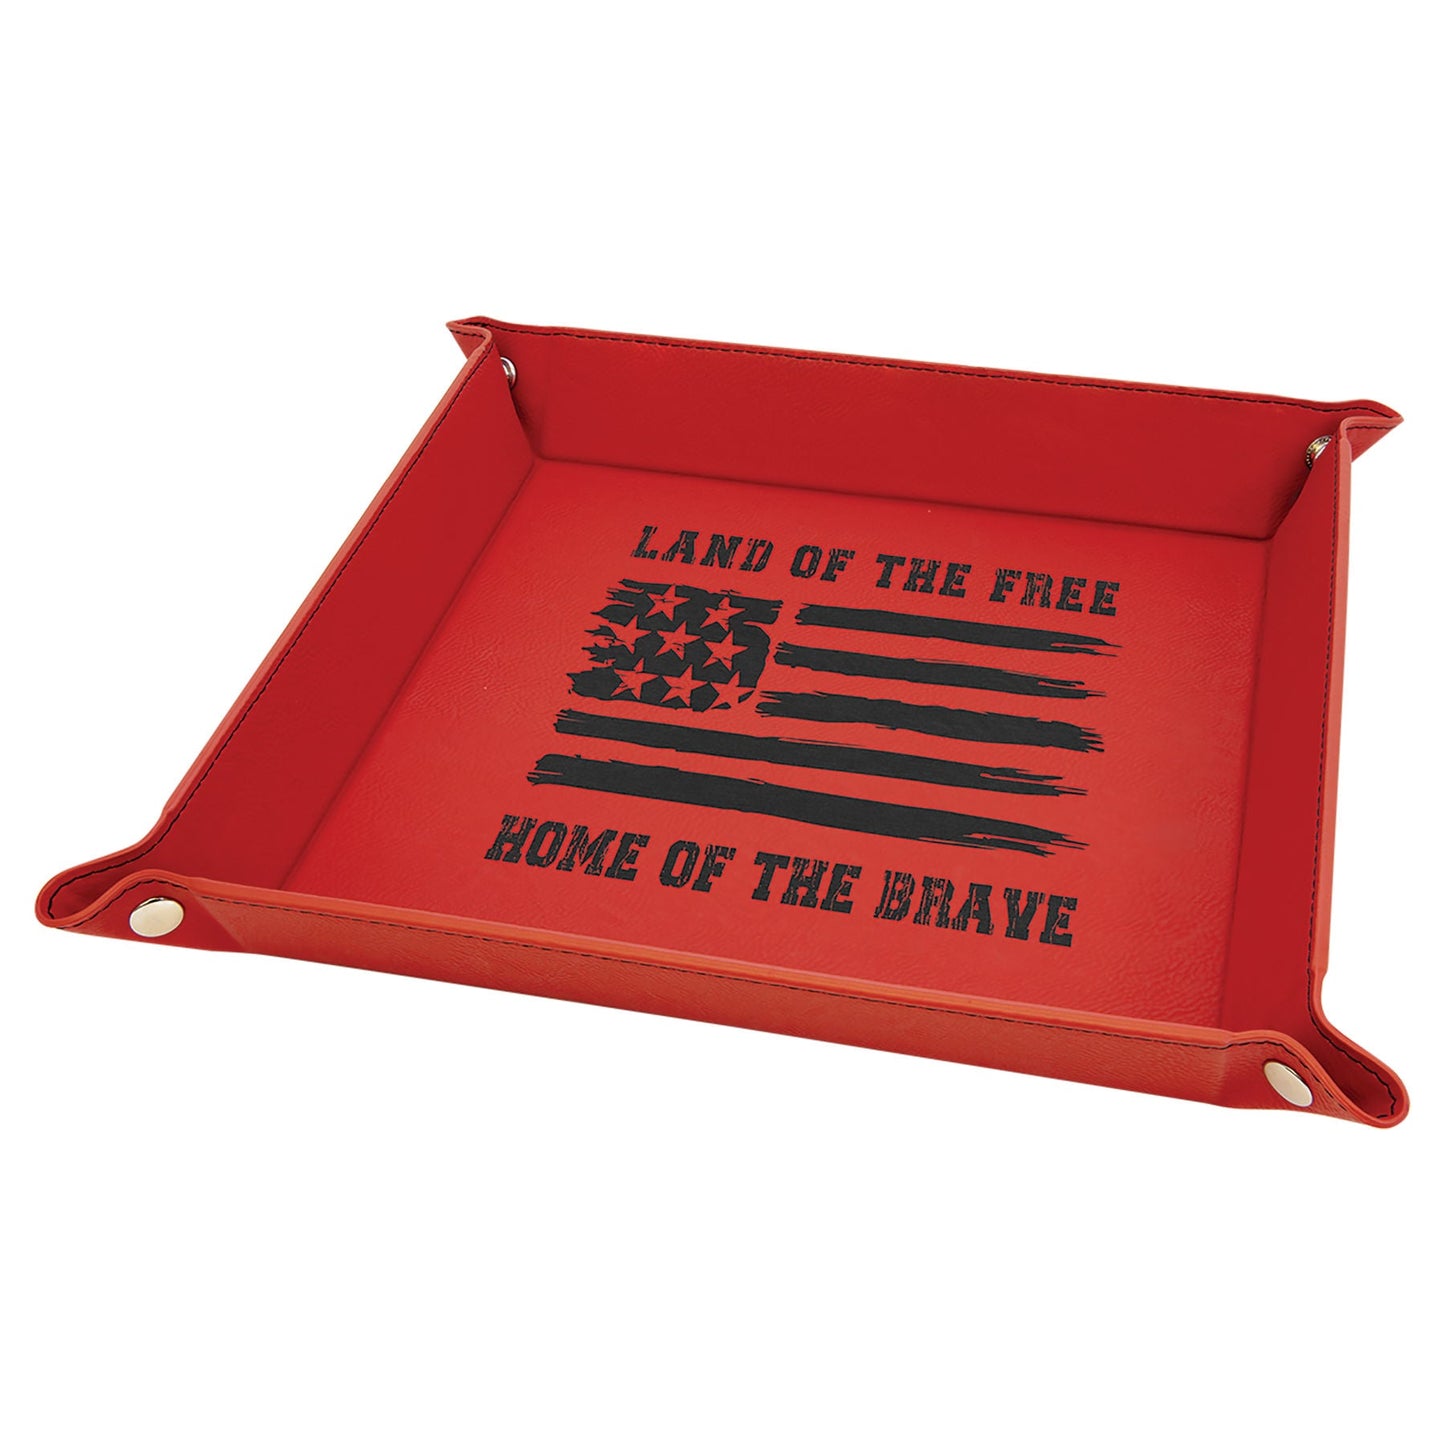 Kappa Alpha Psi ΚΑΨ 9" x 9" Laserable Leatherette Snap Up Tray with Snaps